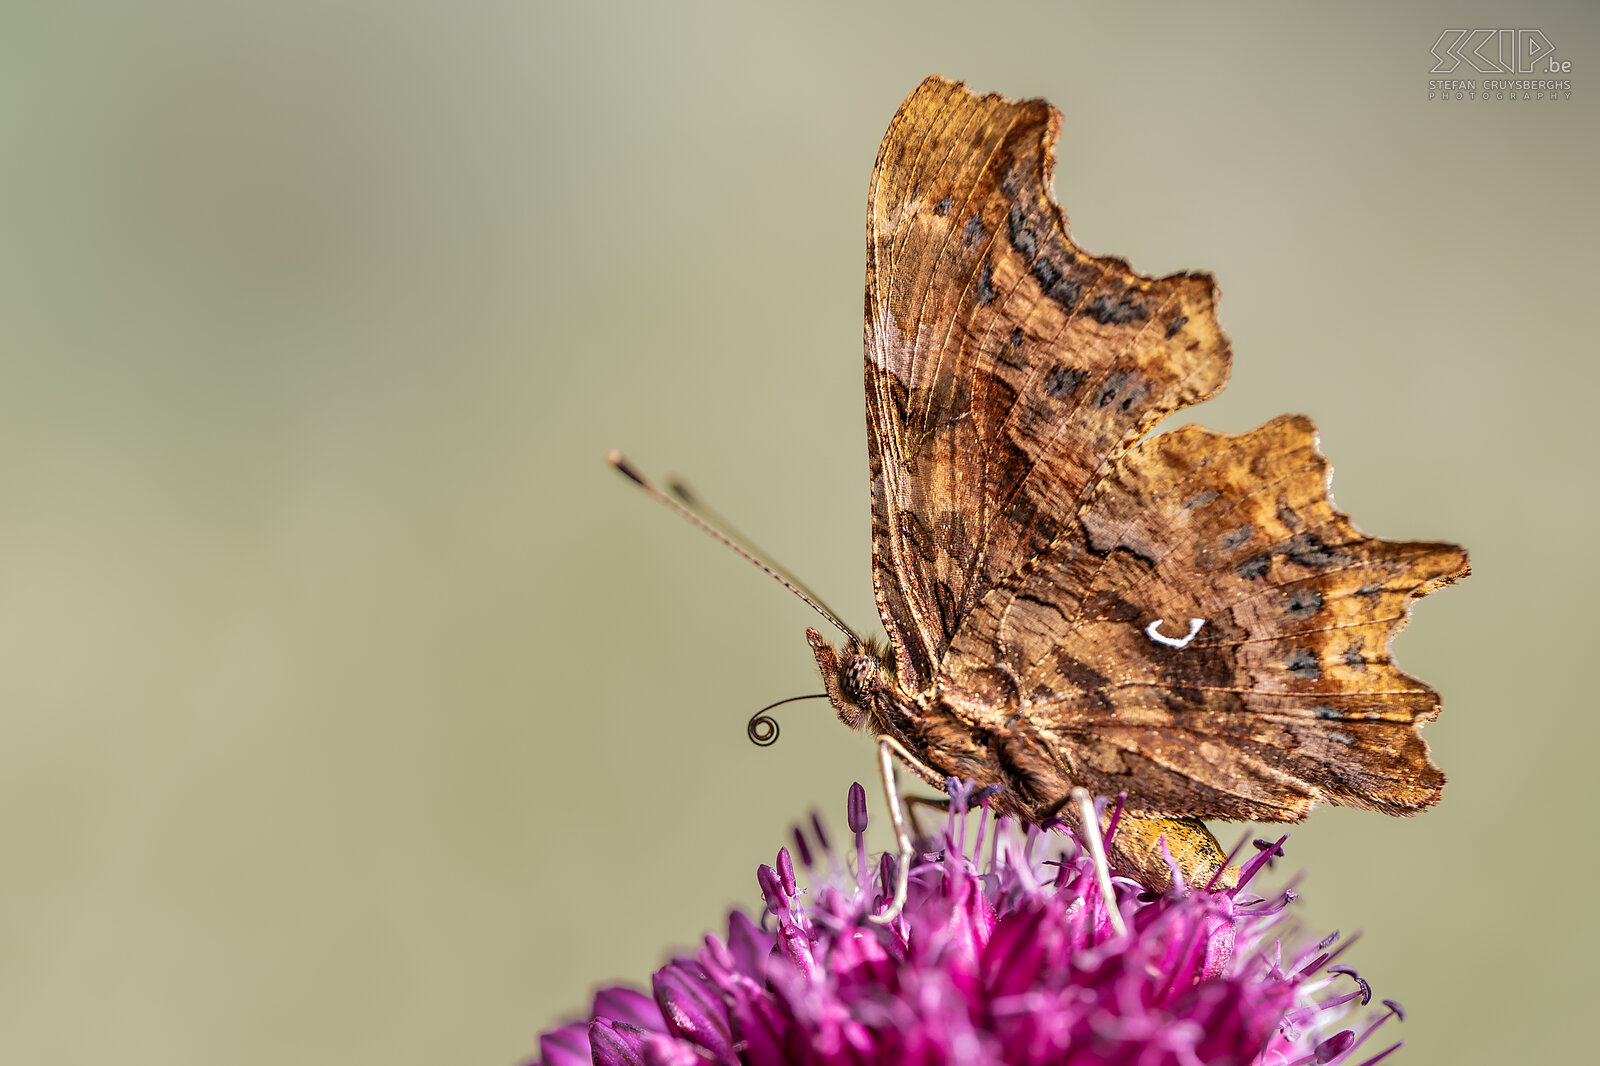 Butterflies - Comma The comma (Polygonia c-album) is a common butterfly with wing that are irregularly dentate, excavated and angulated, the inside color is orange and the hindwings have a white spot in the shape of a C. Stefan Cruysberghs